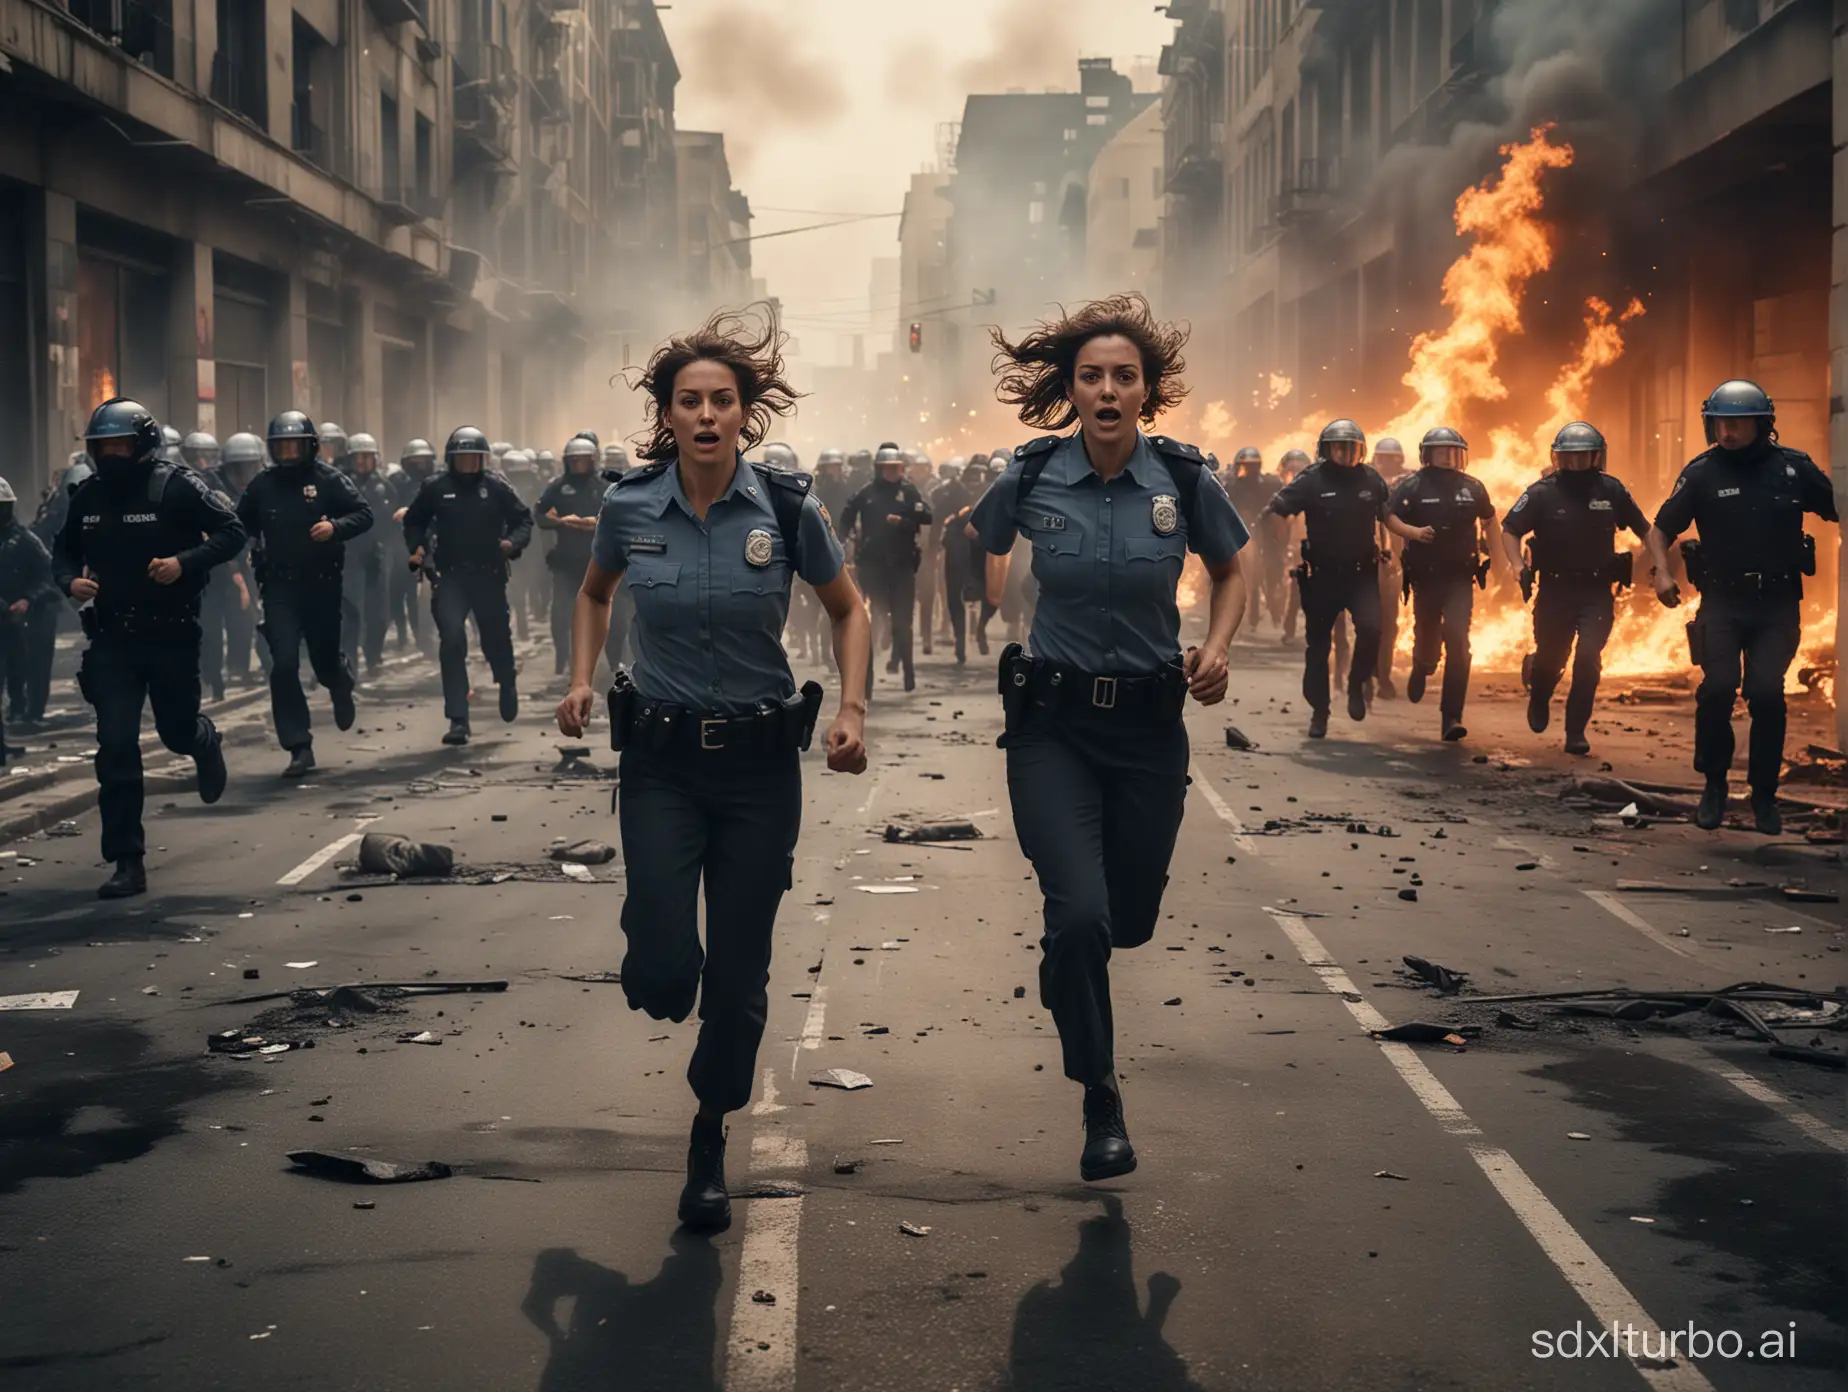 Woman-Running-Through-Police-Lines-in-Crowded-Riot-Amidst-Burning-Buildings